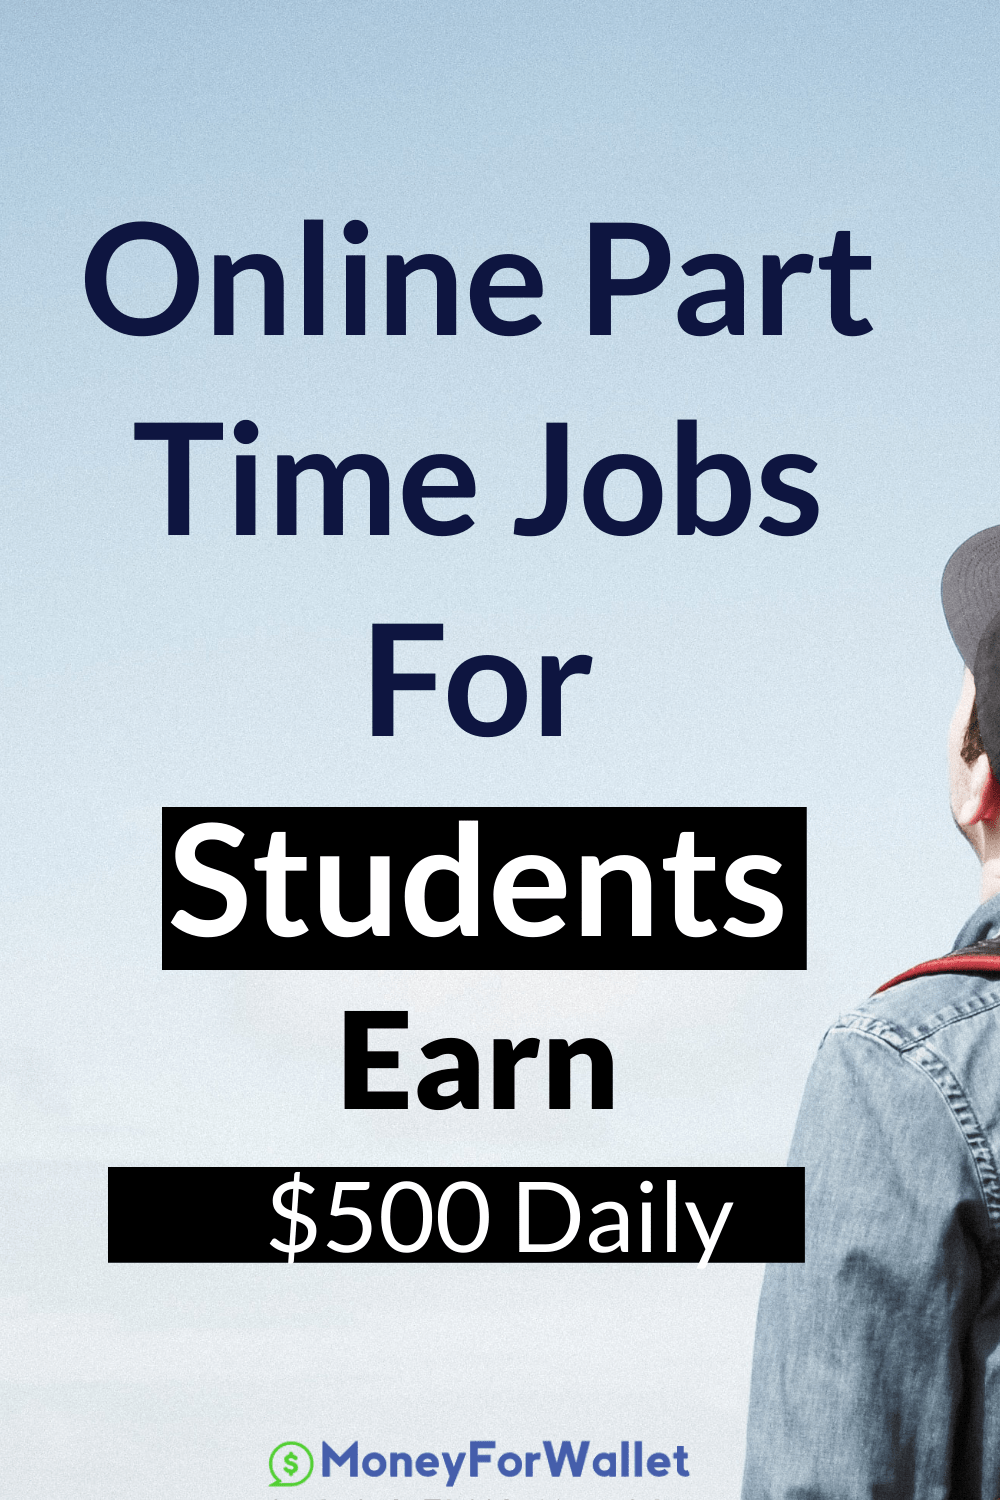 Online Part Time Jobs For Students